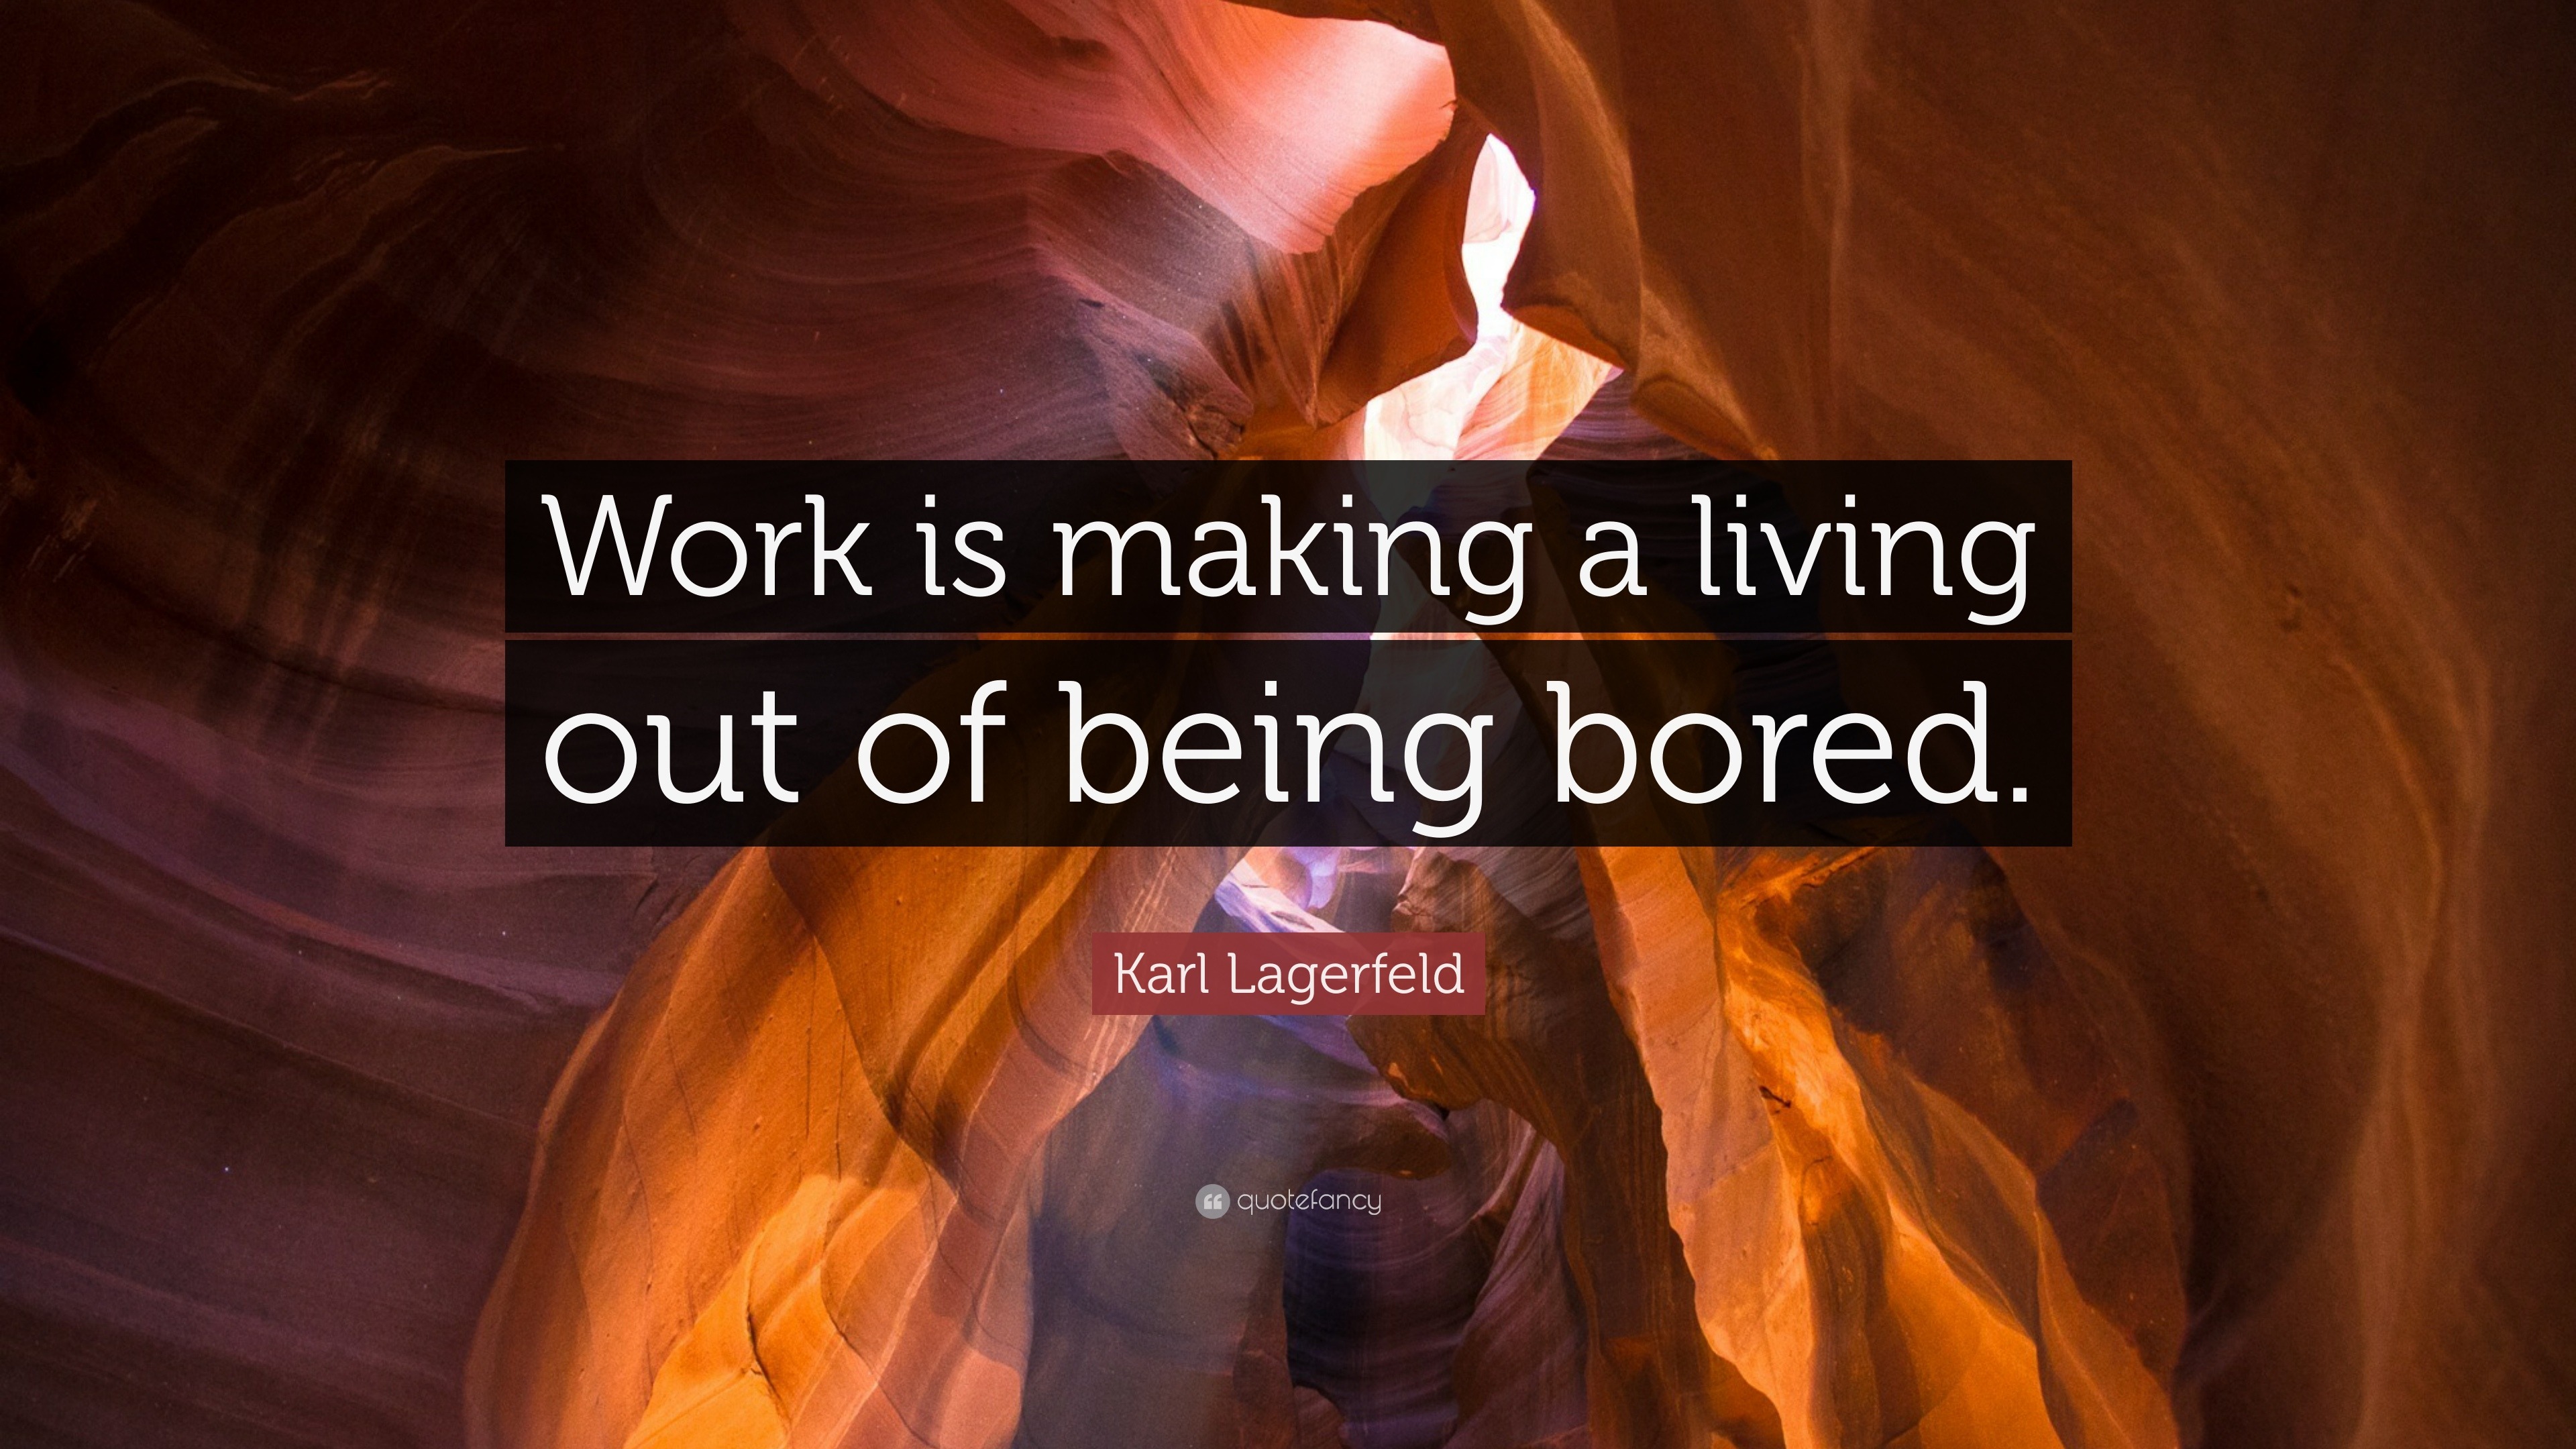 Work is making a living out of being bored”: 30 memorable quotes